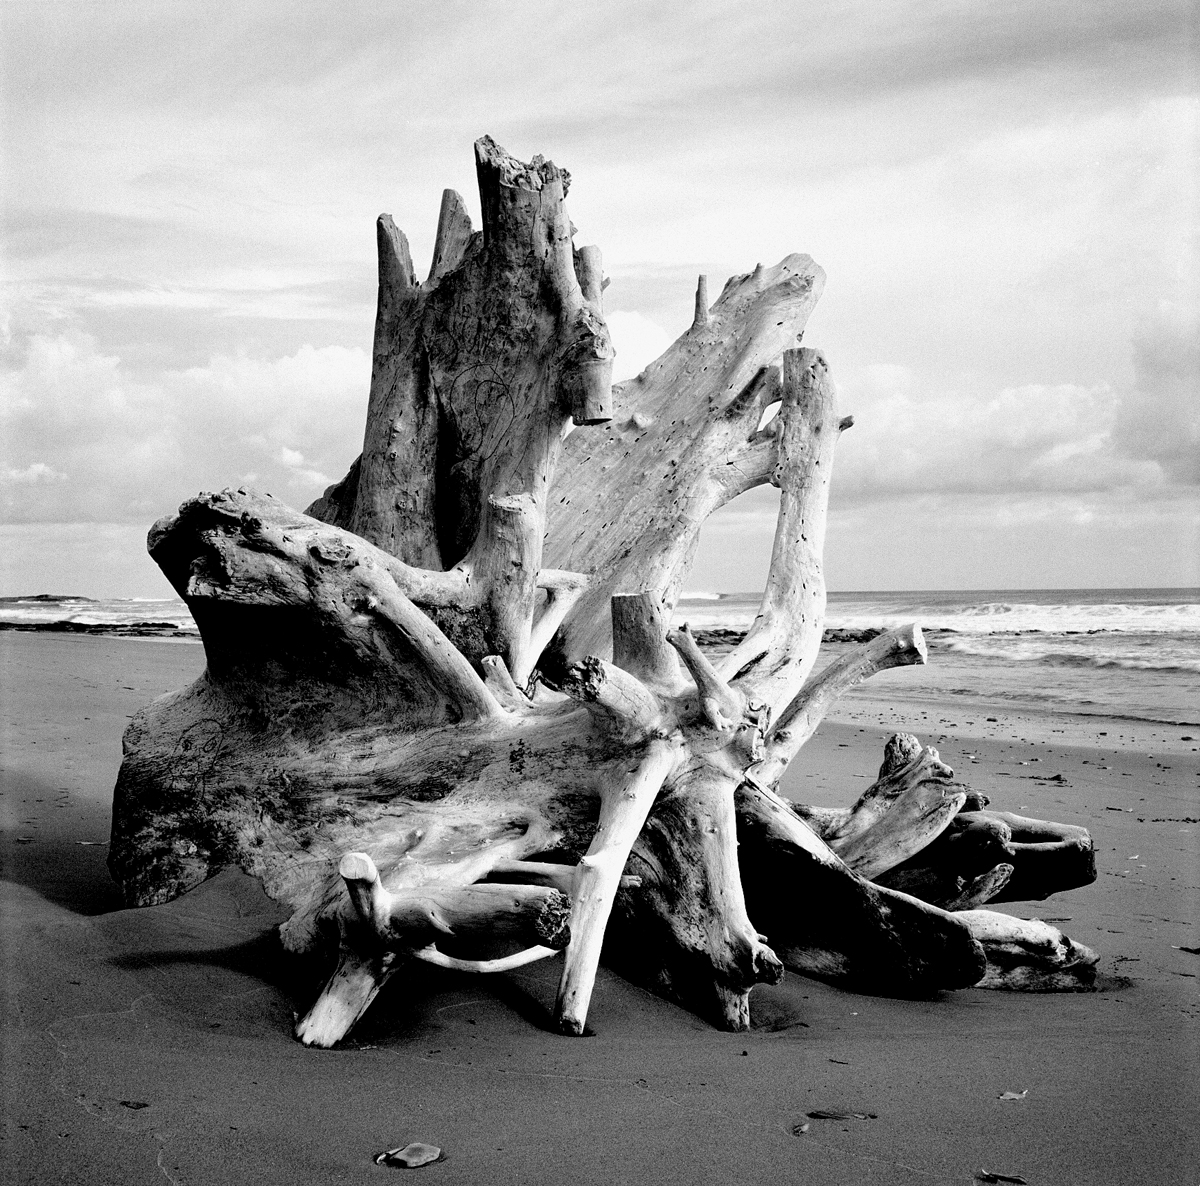 Tree stump, Nicaragua, Popoyo, black and white, B&W, photograph, photography, Phill Wilkinson, beach, landscape, picture, driftwood,